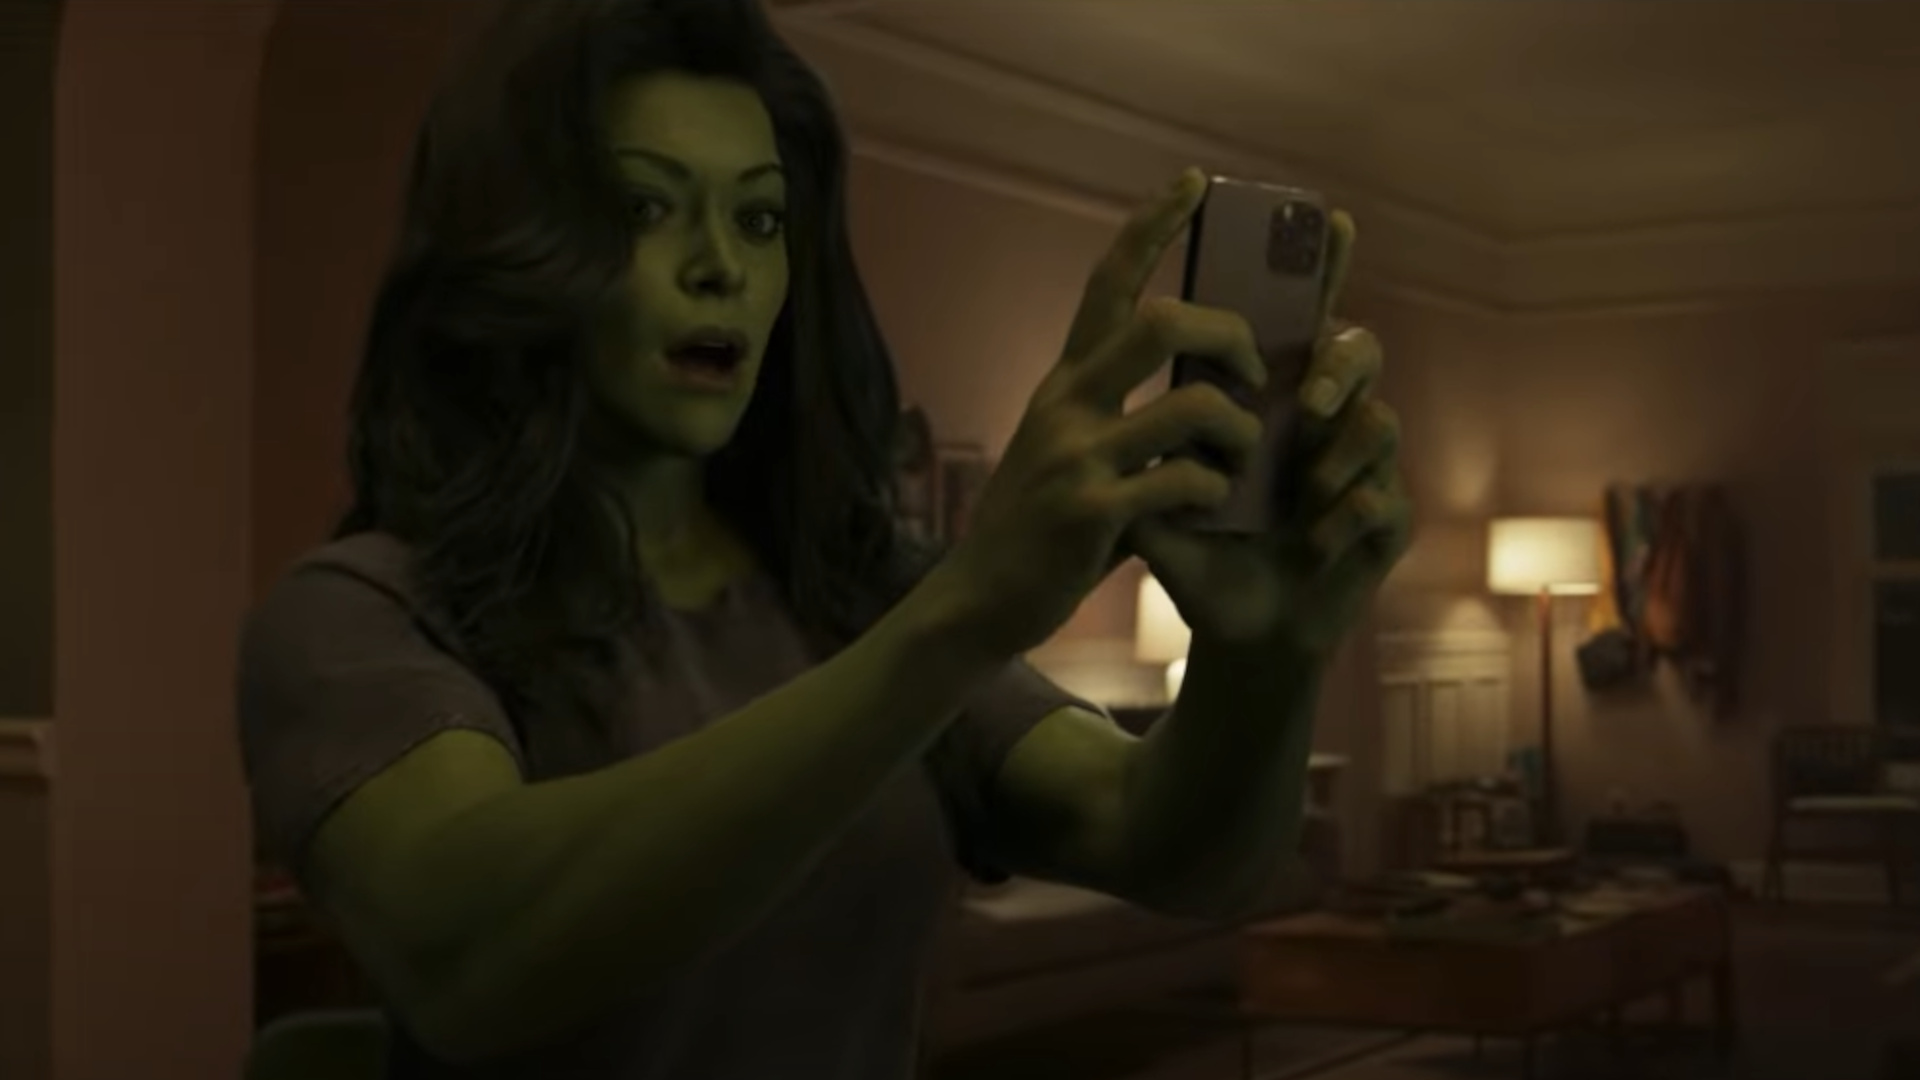 She-Hulk: Attorney at Law (TV Series 2022): Tim Roth, Mark Ruffalo, Tatiana Maslany, Debut in the Marvel Cinematic Universe, Legal justice. 1920x1080 Full HD Wallpaper.